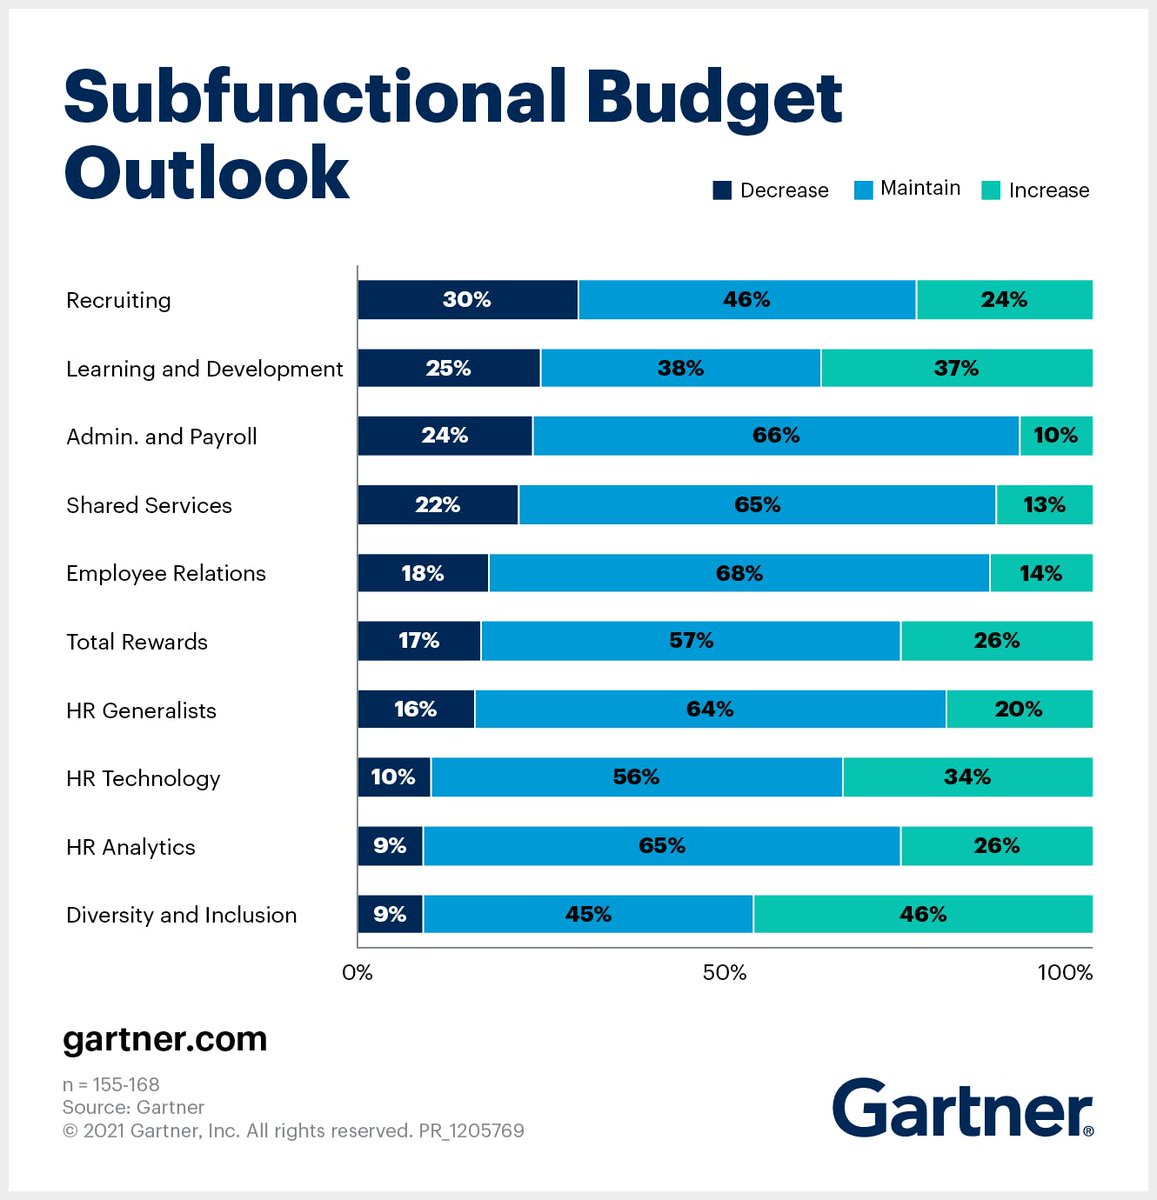 Gartner studies report that priorities in HR function budgets are likely to keep shifting in 2021 - Research shows more than one-third of respondents want to increase their HR technology budgets.

#HR #technology #futureofwork #hcmtechnology gtnr.it/3dzks6B